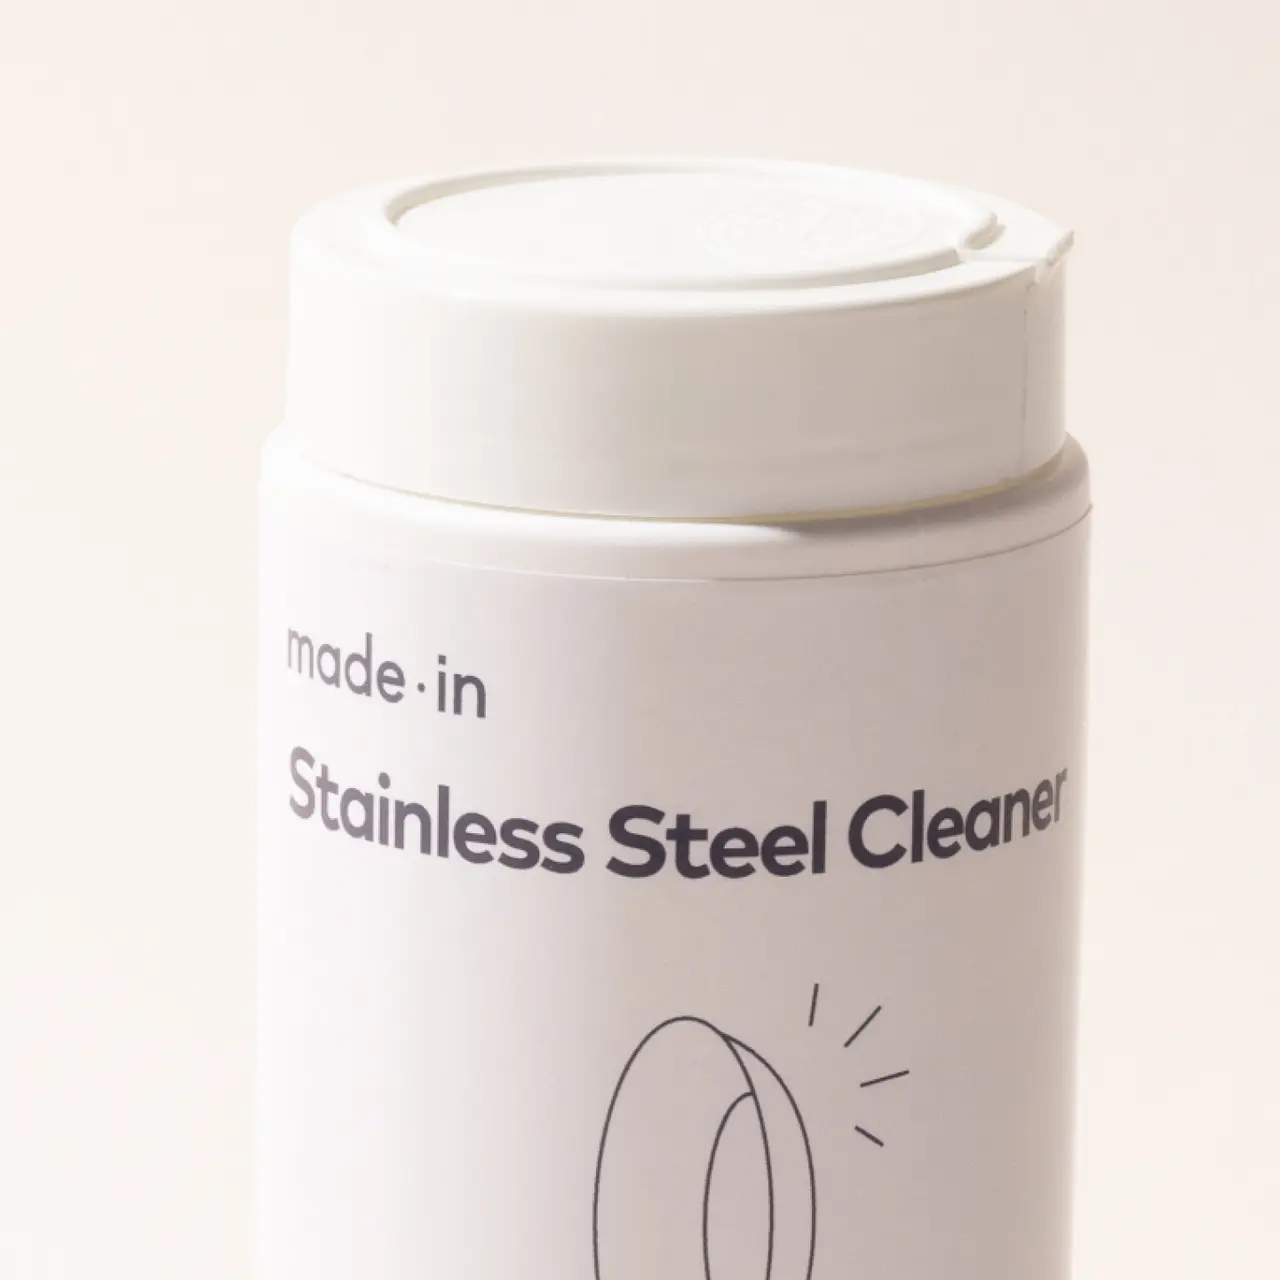 12-Ounce Stainless Steel Cookware Cleaner I All-Clad